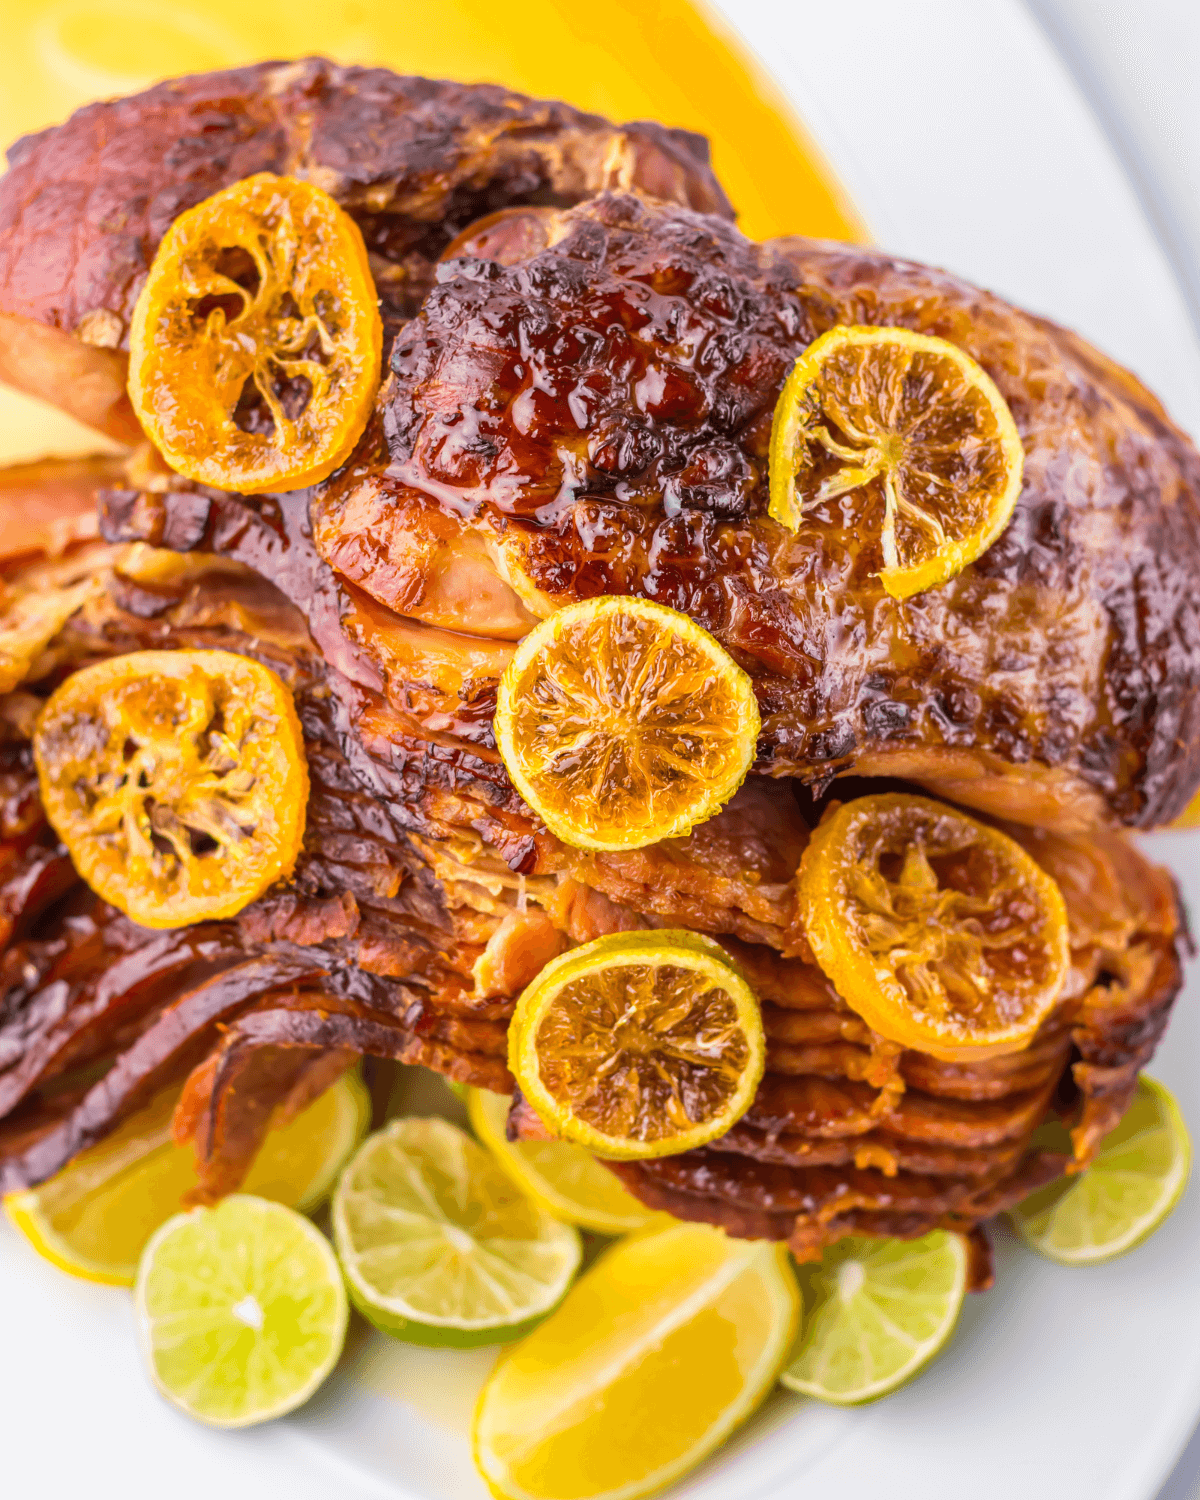 Meat with caramelized orange slices, accompanied by lime and orange wedges on a white plate.